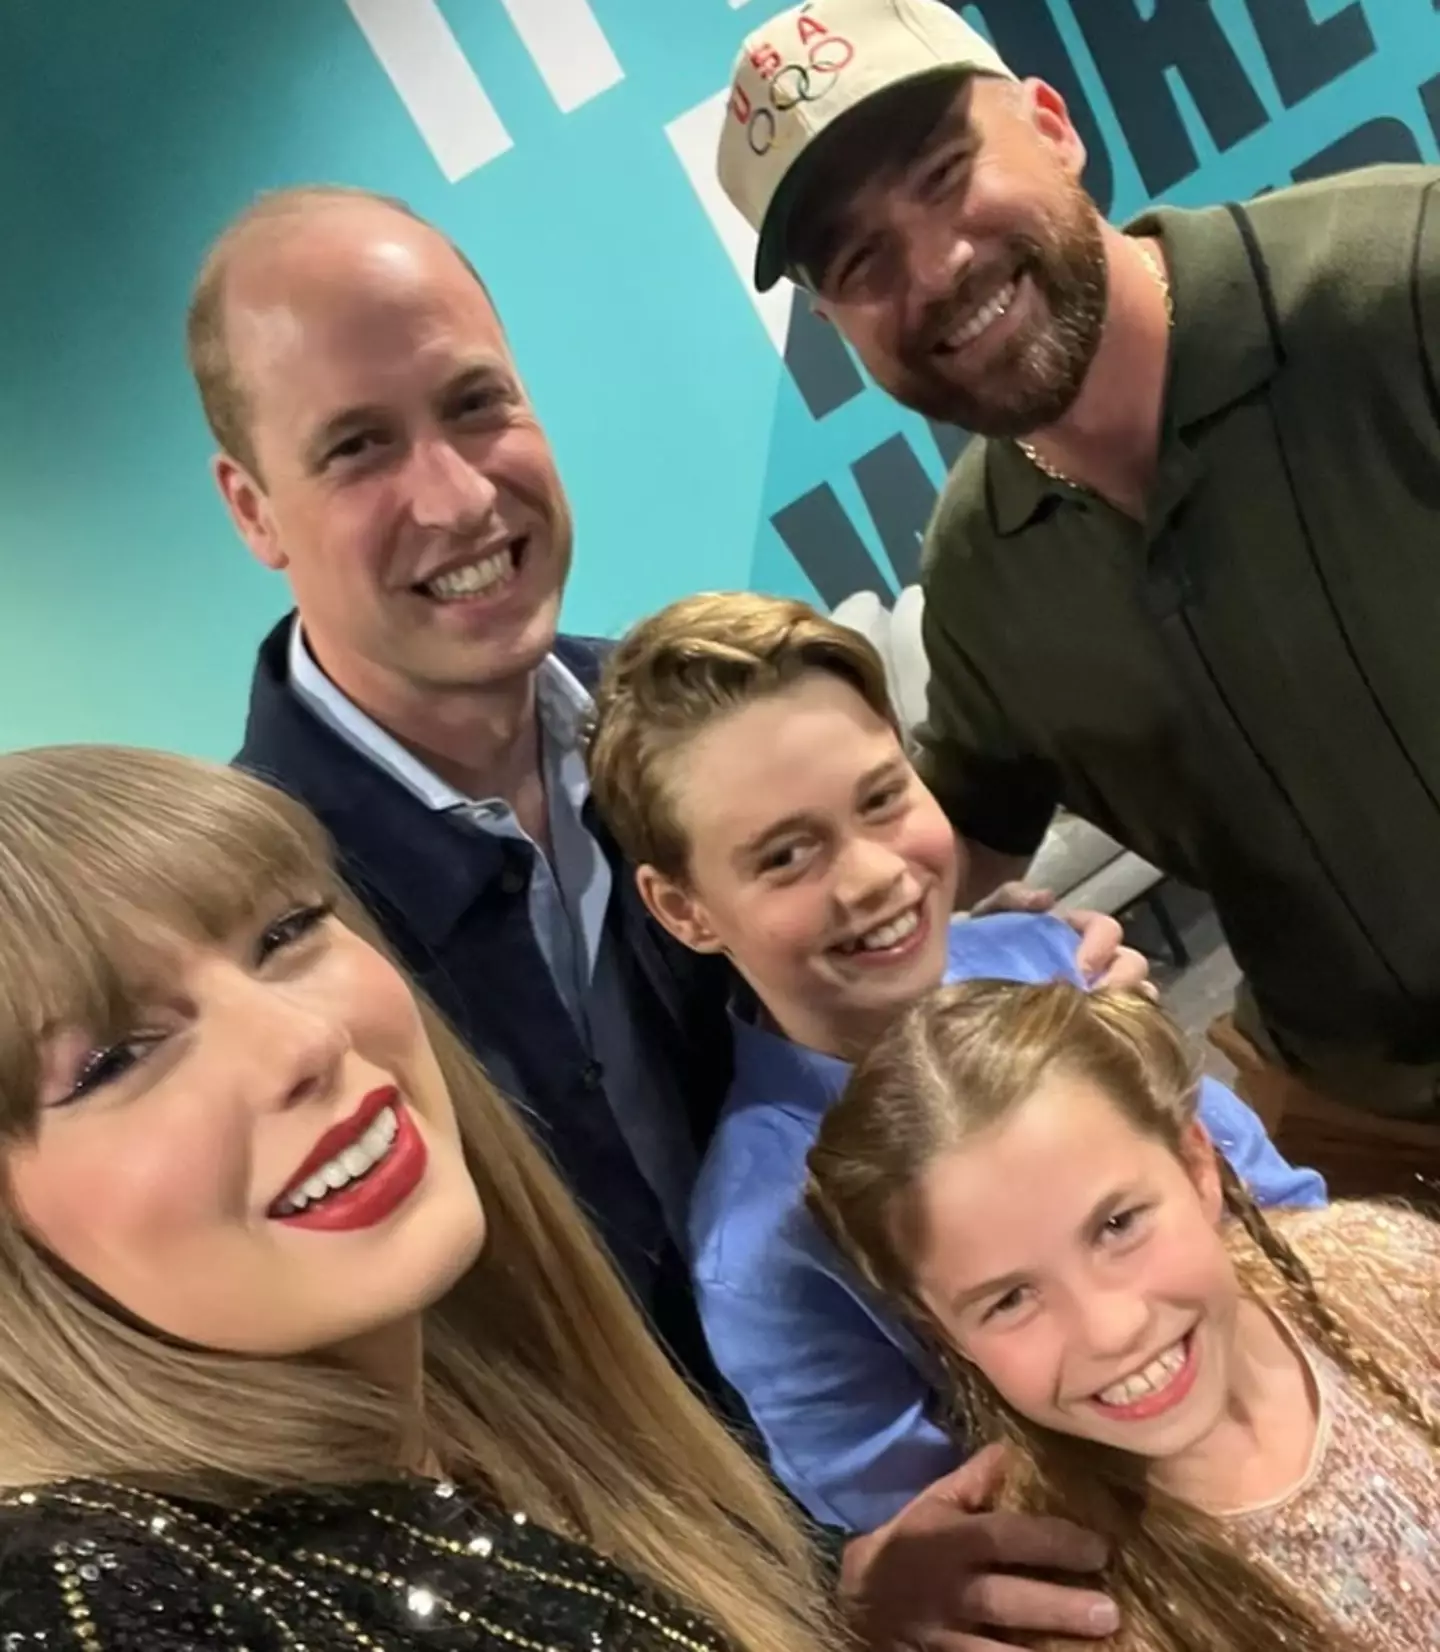 Travis and Taylor met the Royals. Instagram/ @taylorswift